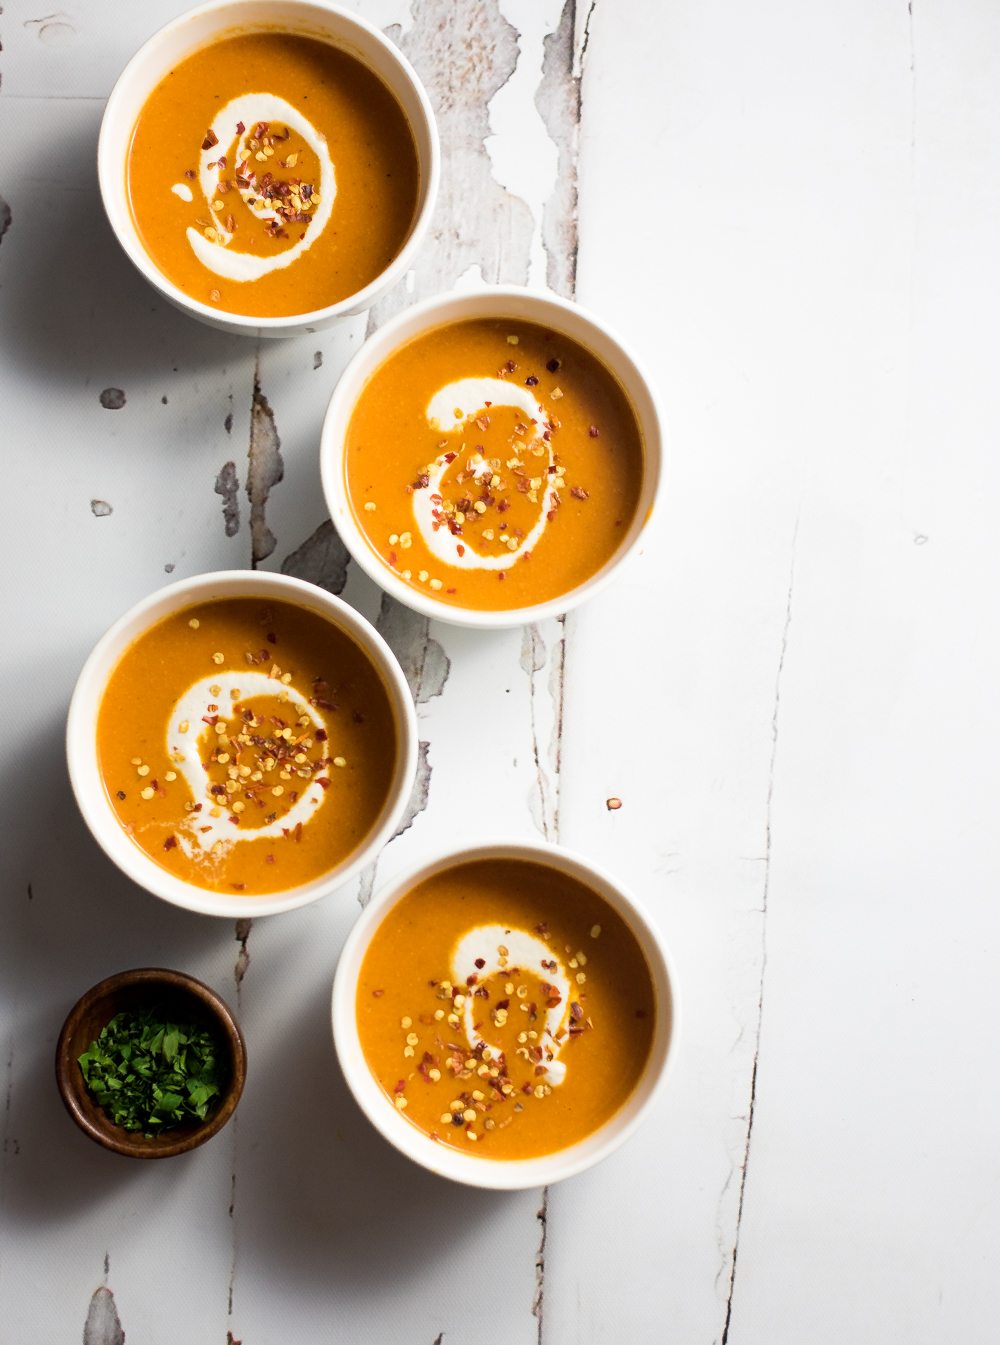 Low and Slow: Cozy Soups that Are So Worth Your Time